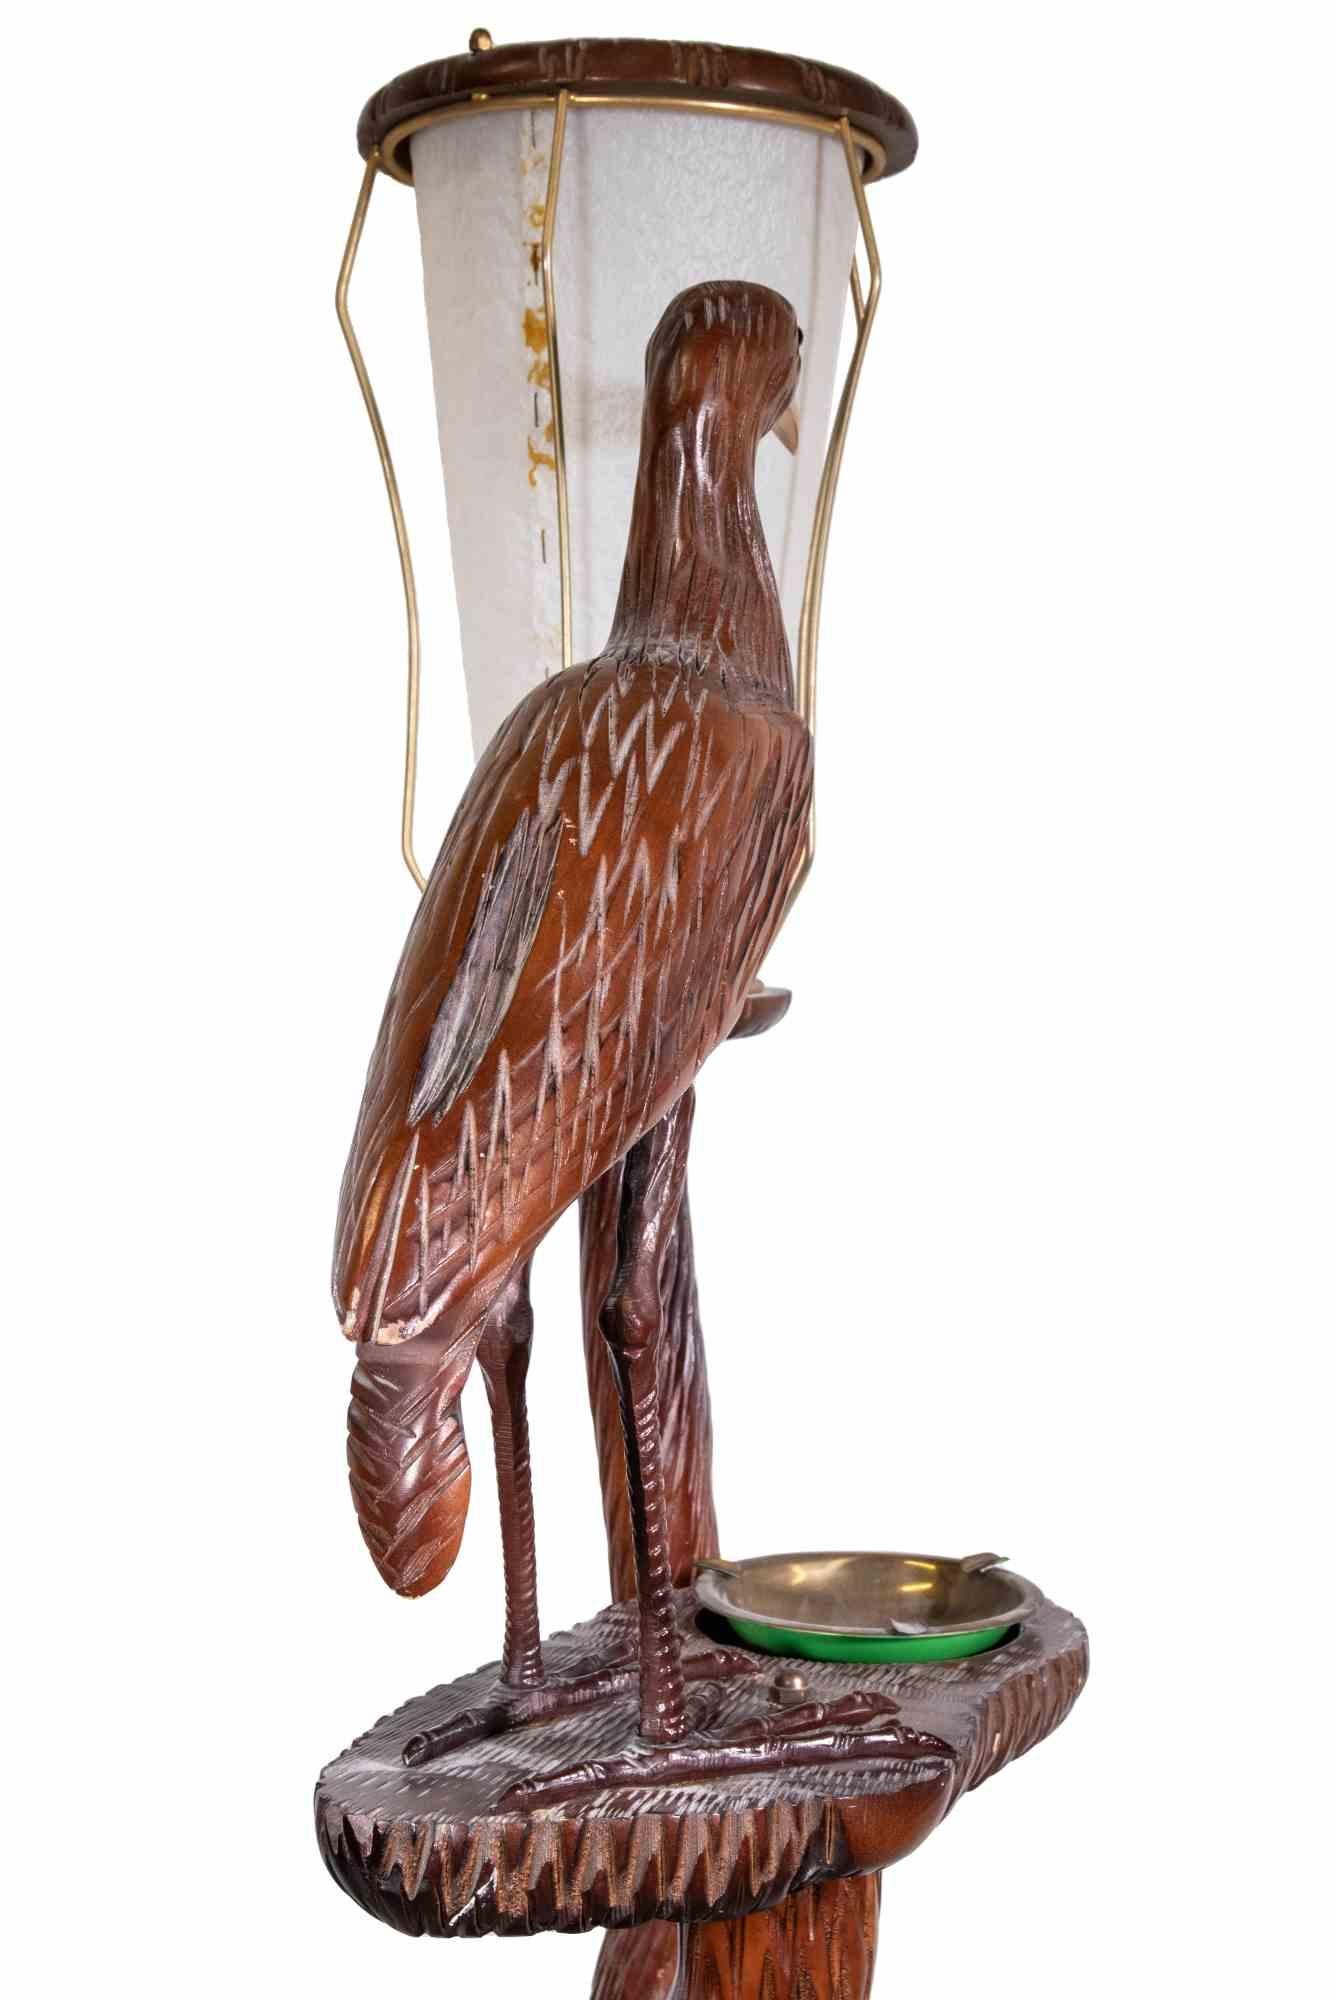 Vintage Wooden Lamp with Bird, Italian Lamp by Aldo Tura, Italy, 1950s For Sale 2